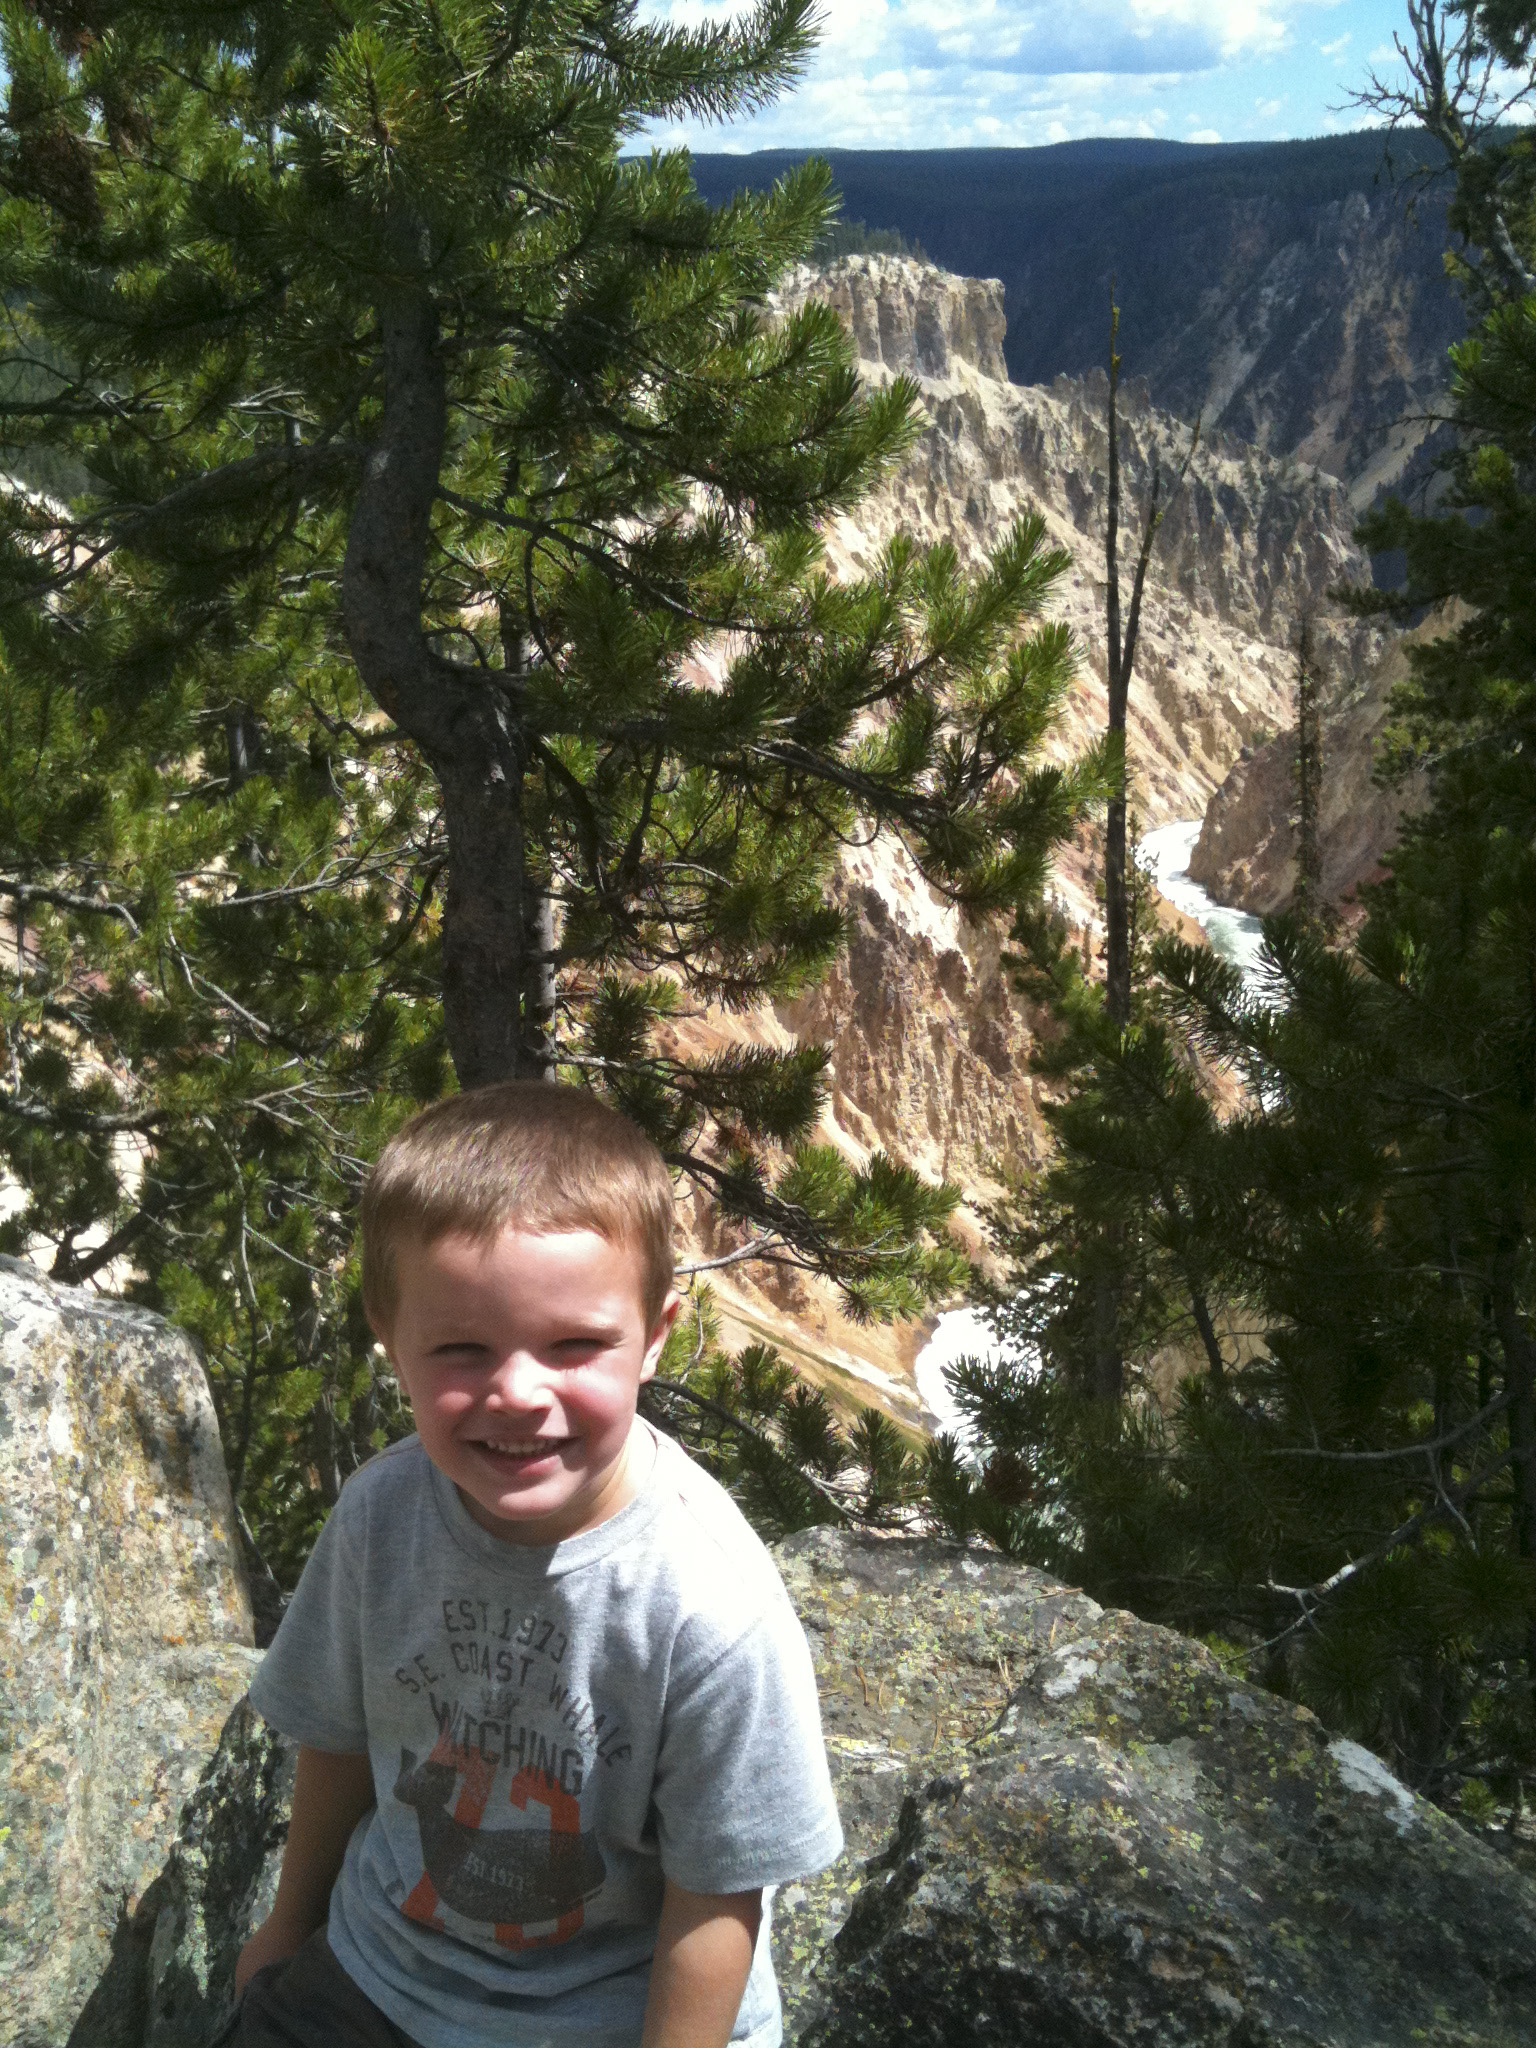 My nephew and the Yellowstone river canyon